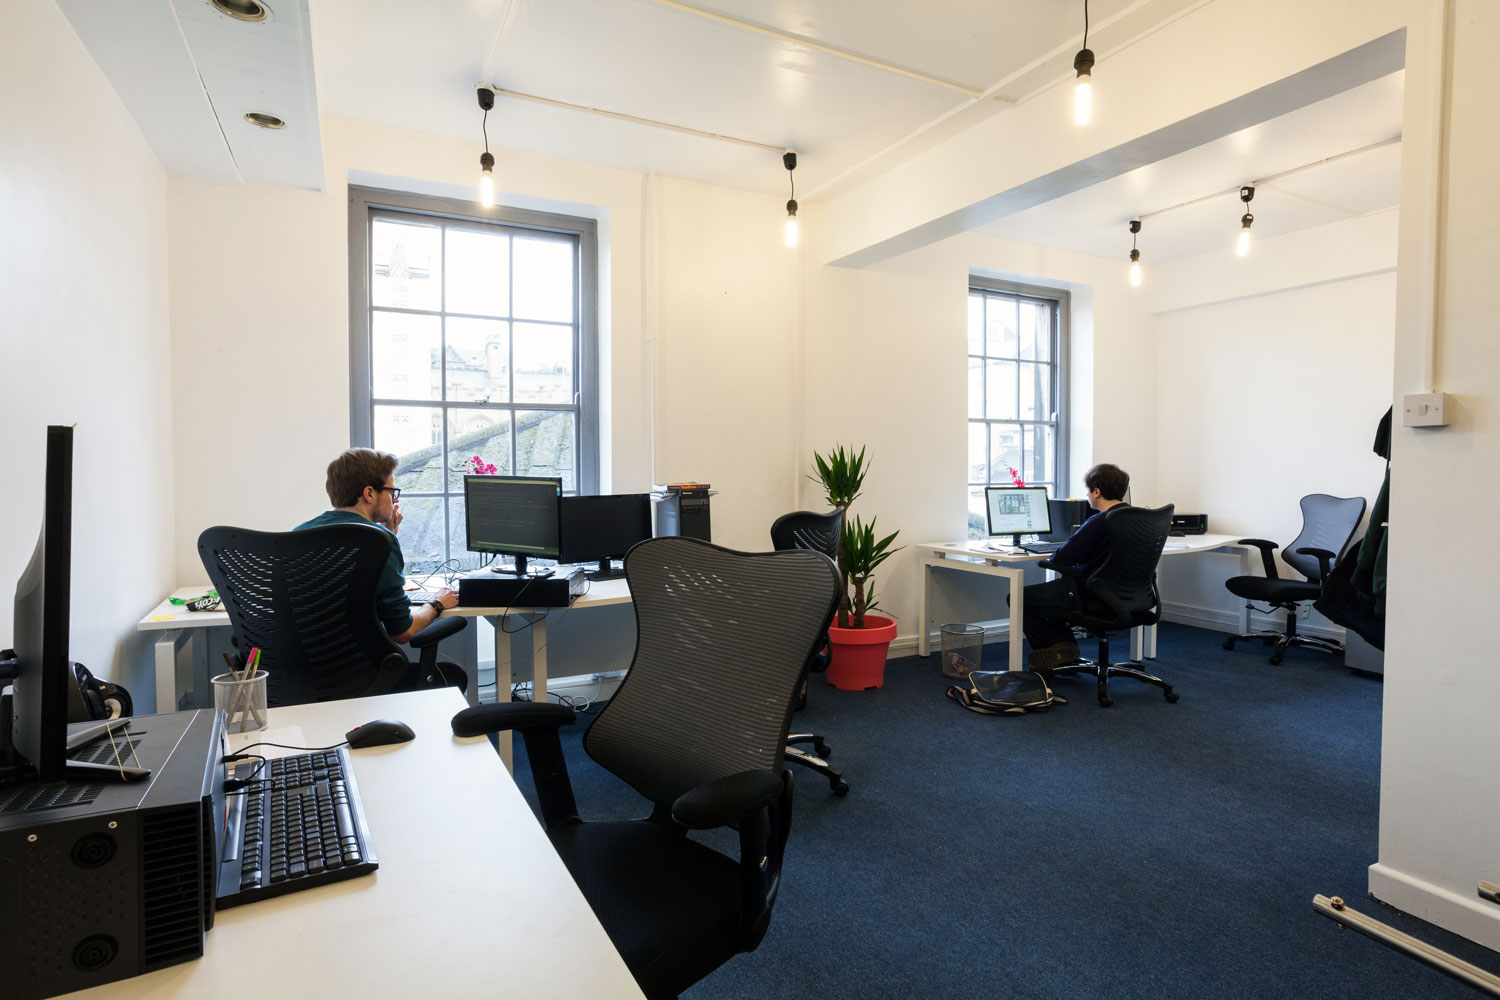 The Pros and Cons of Hot Desking vs. Desk Hoteling